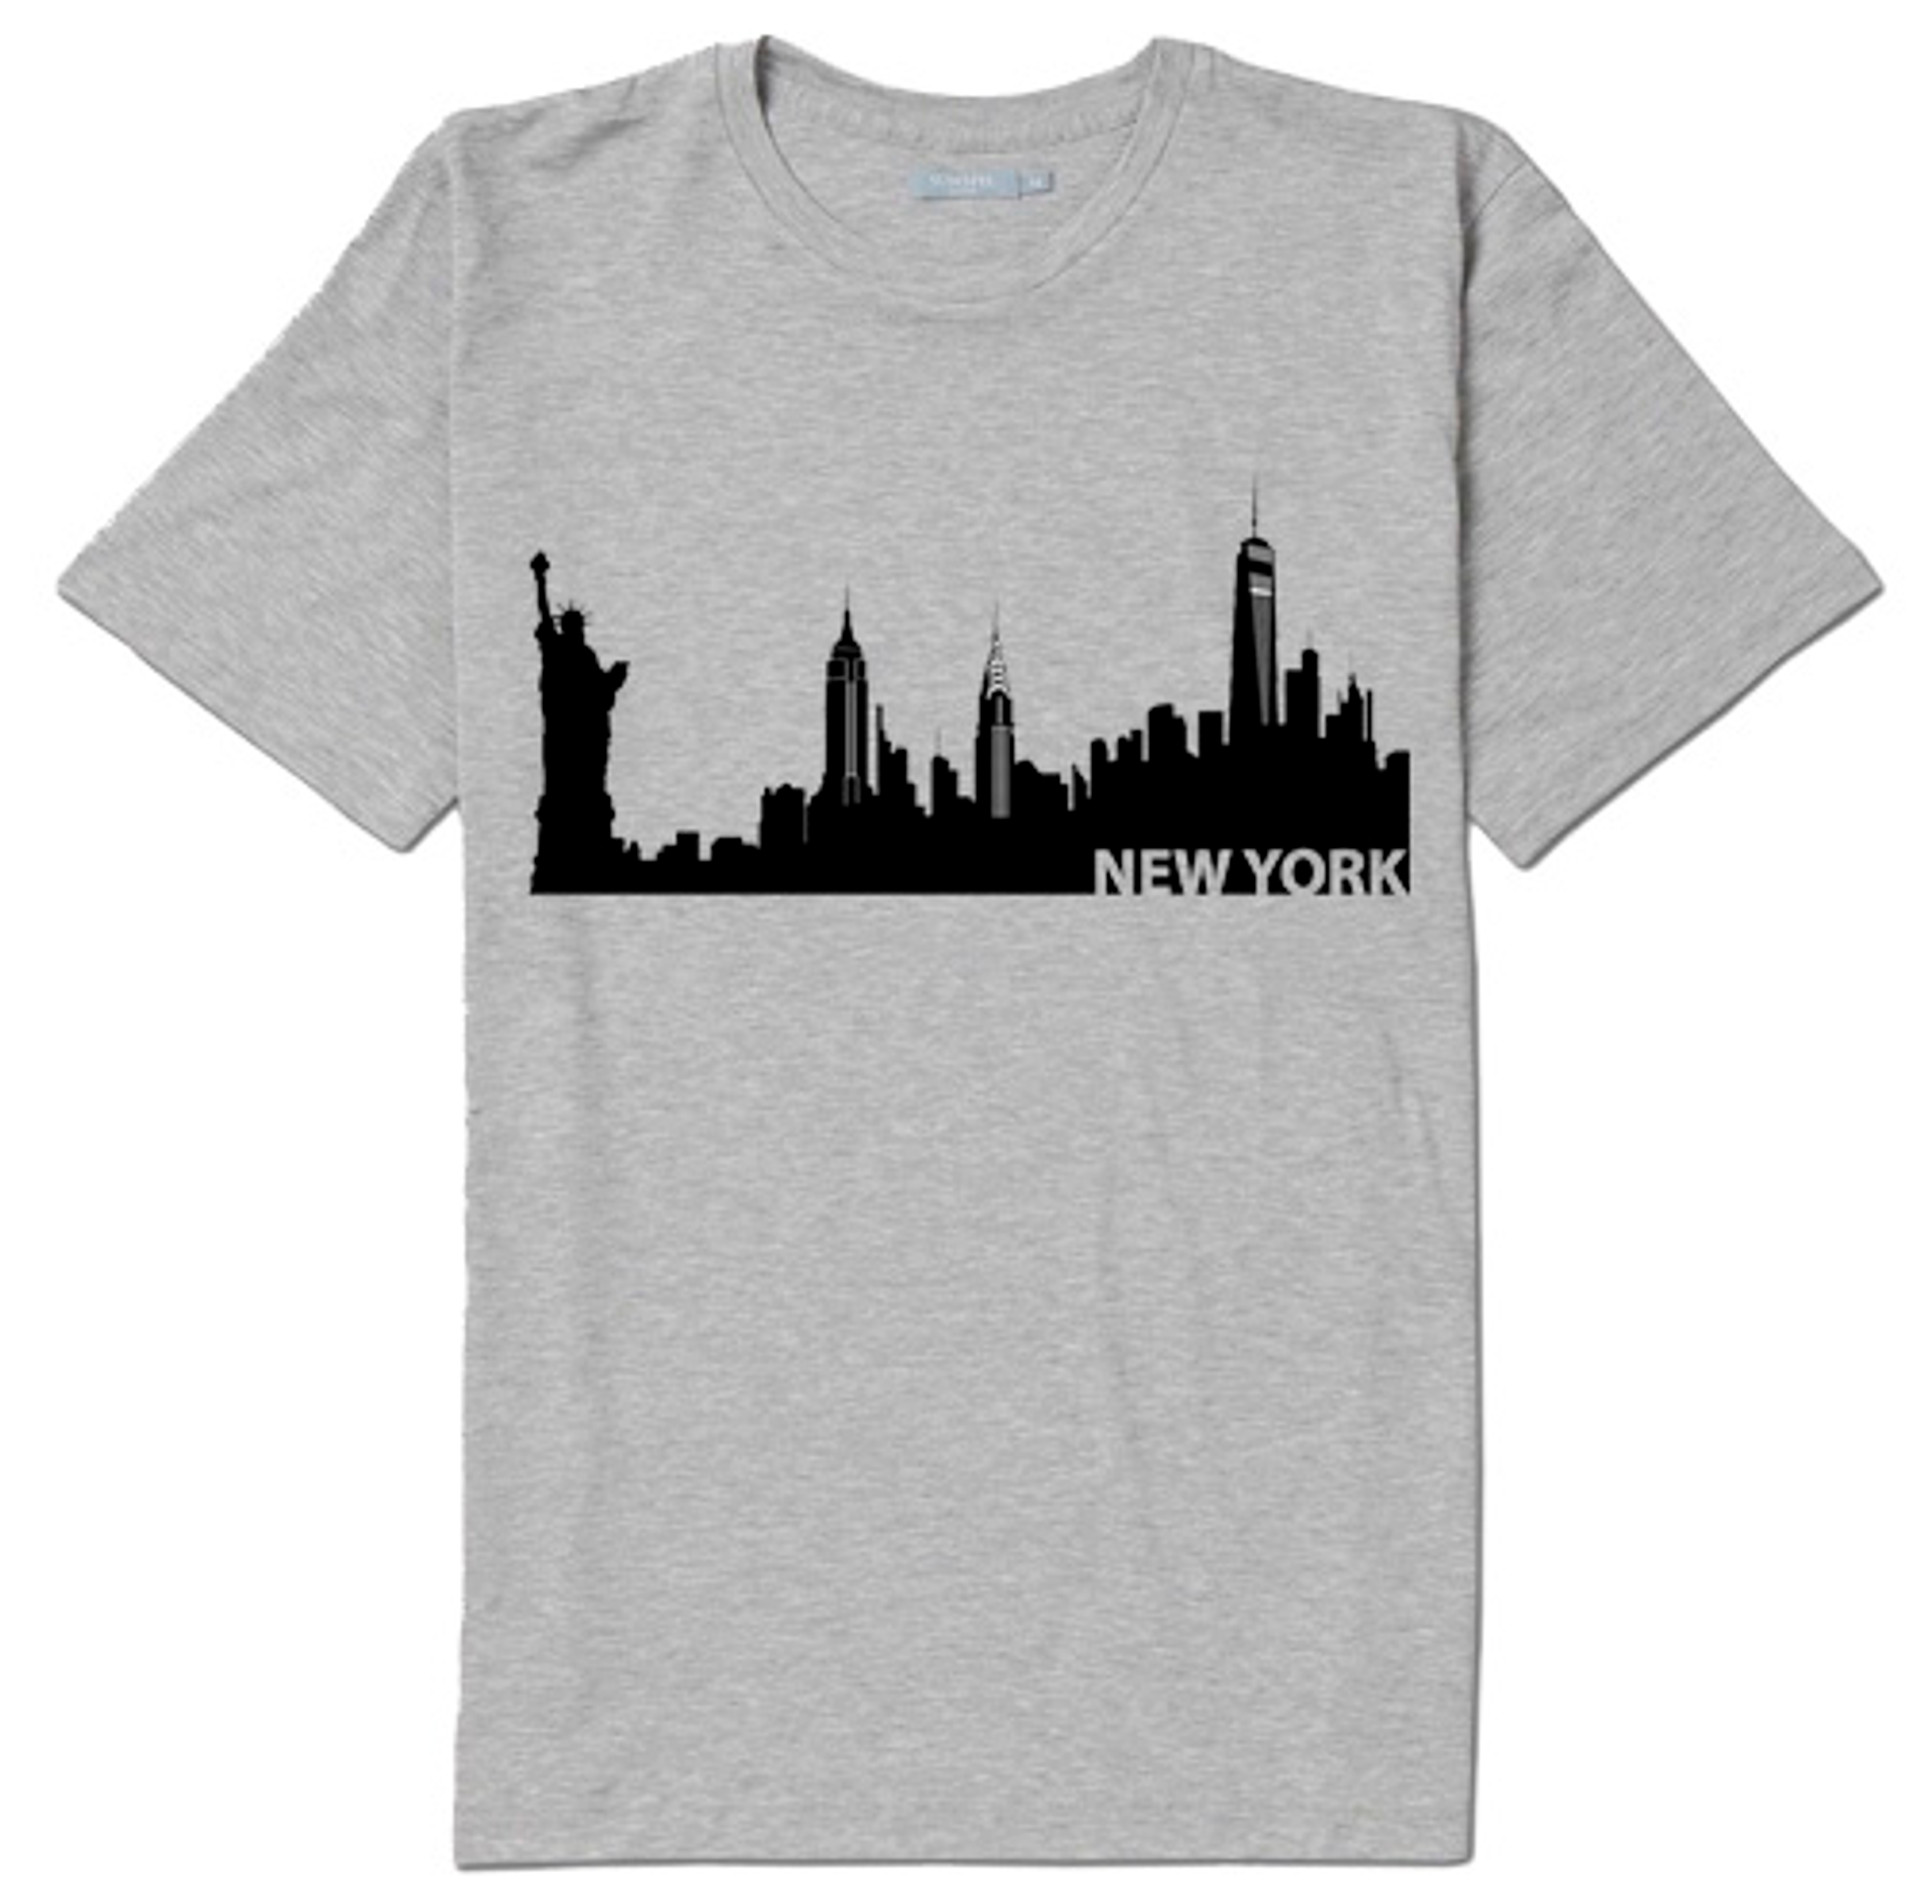 Times Square Yellow Cabs White Adult T-shirt